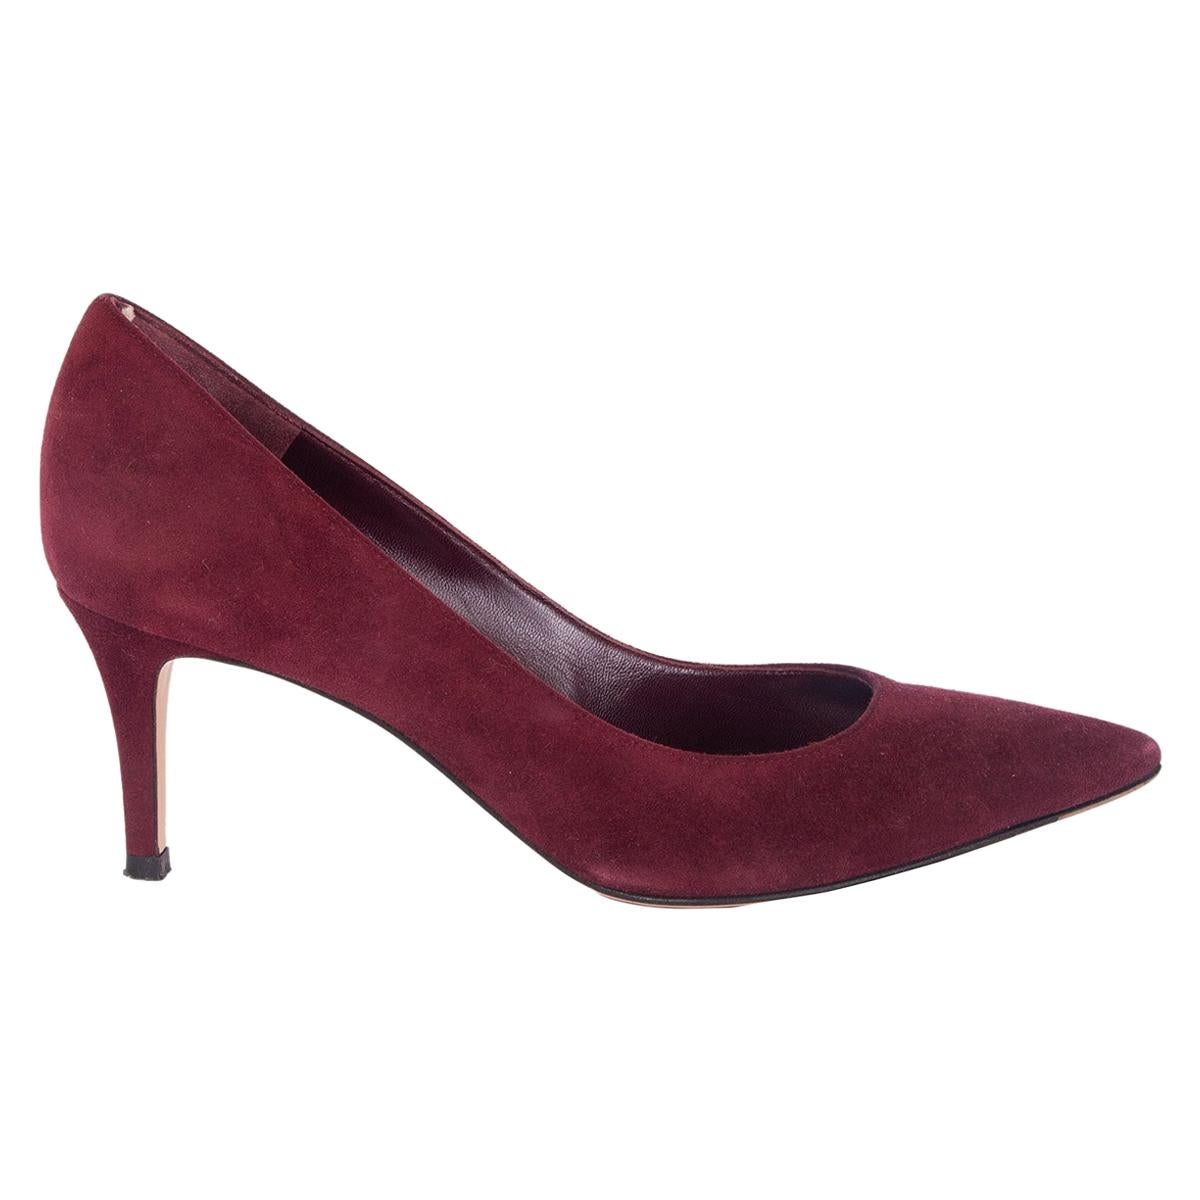 GIANVITO ROSSI burgundy suede GIANVITO 70 Pointed-Toe Pumps Shoes 36 For Sale